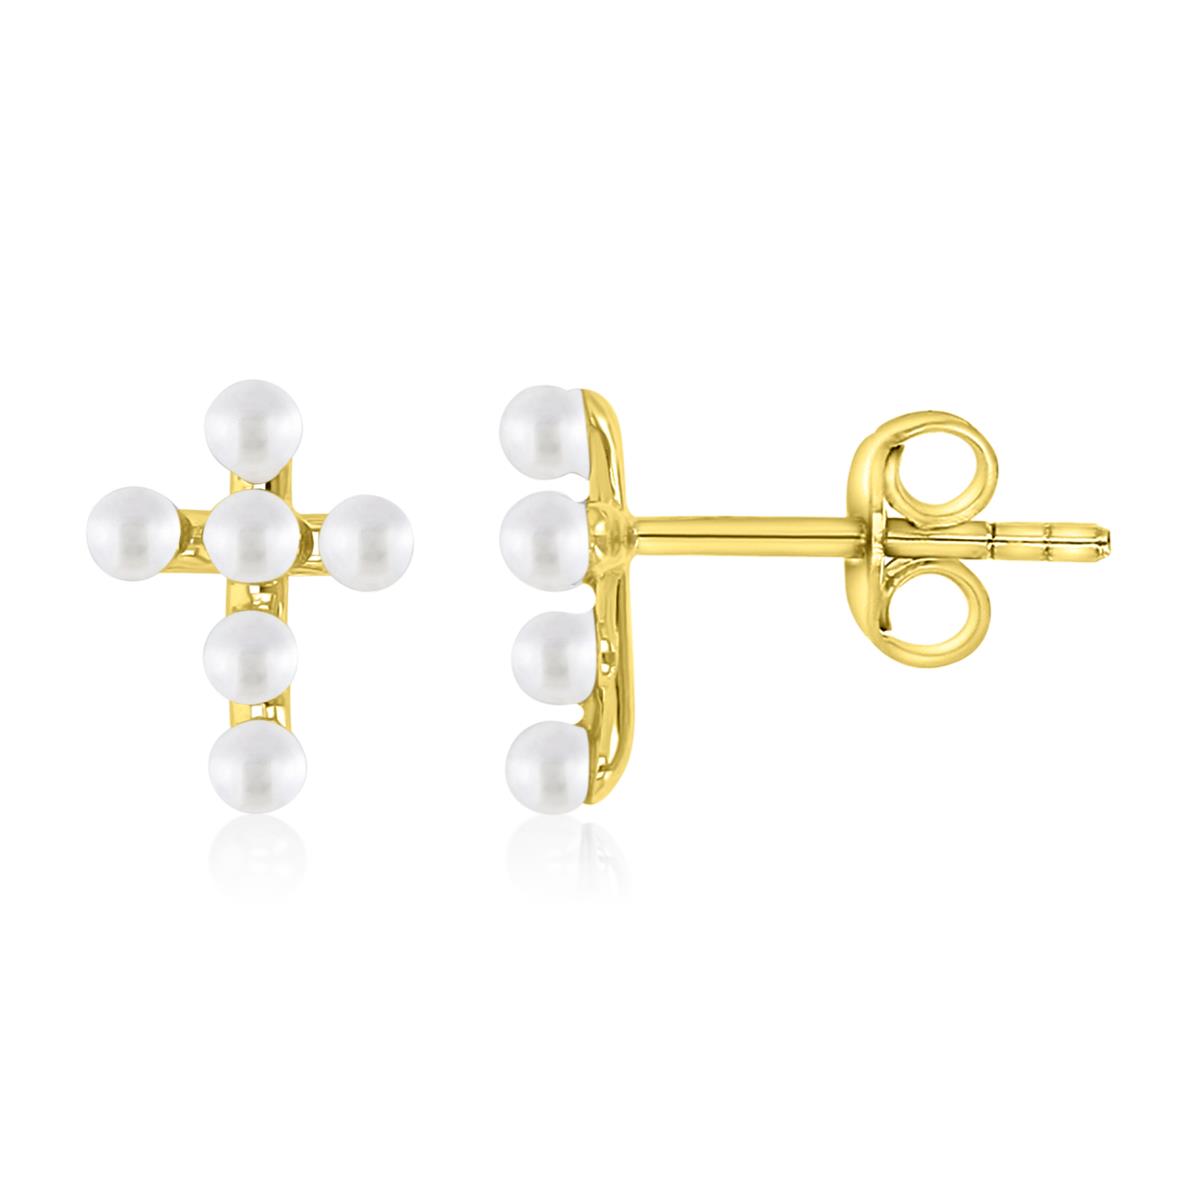 Sterling Silver Yellow 1M 9.5X7MM Polished White Faux Pearl Cross Stud Earrings